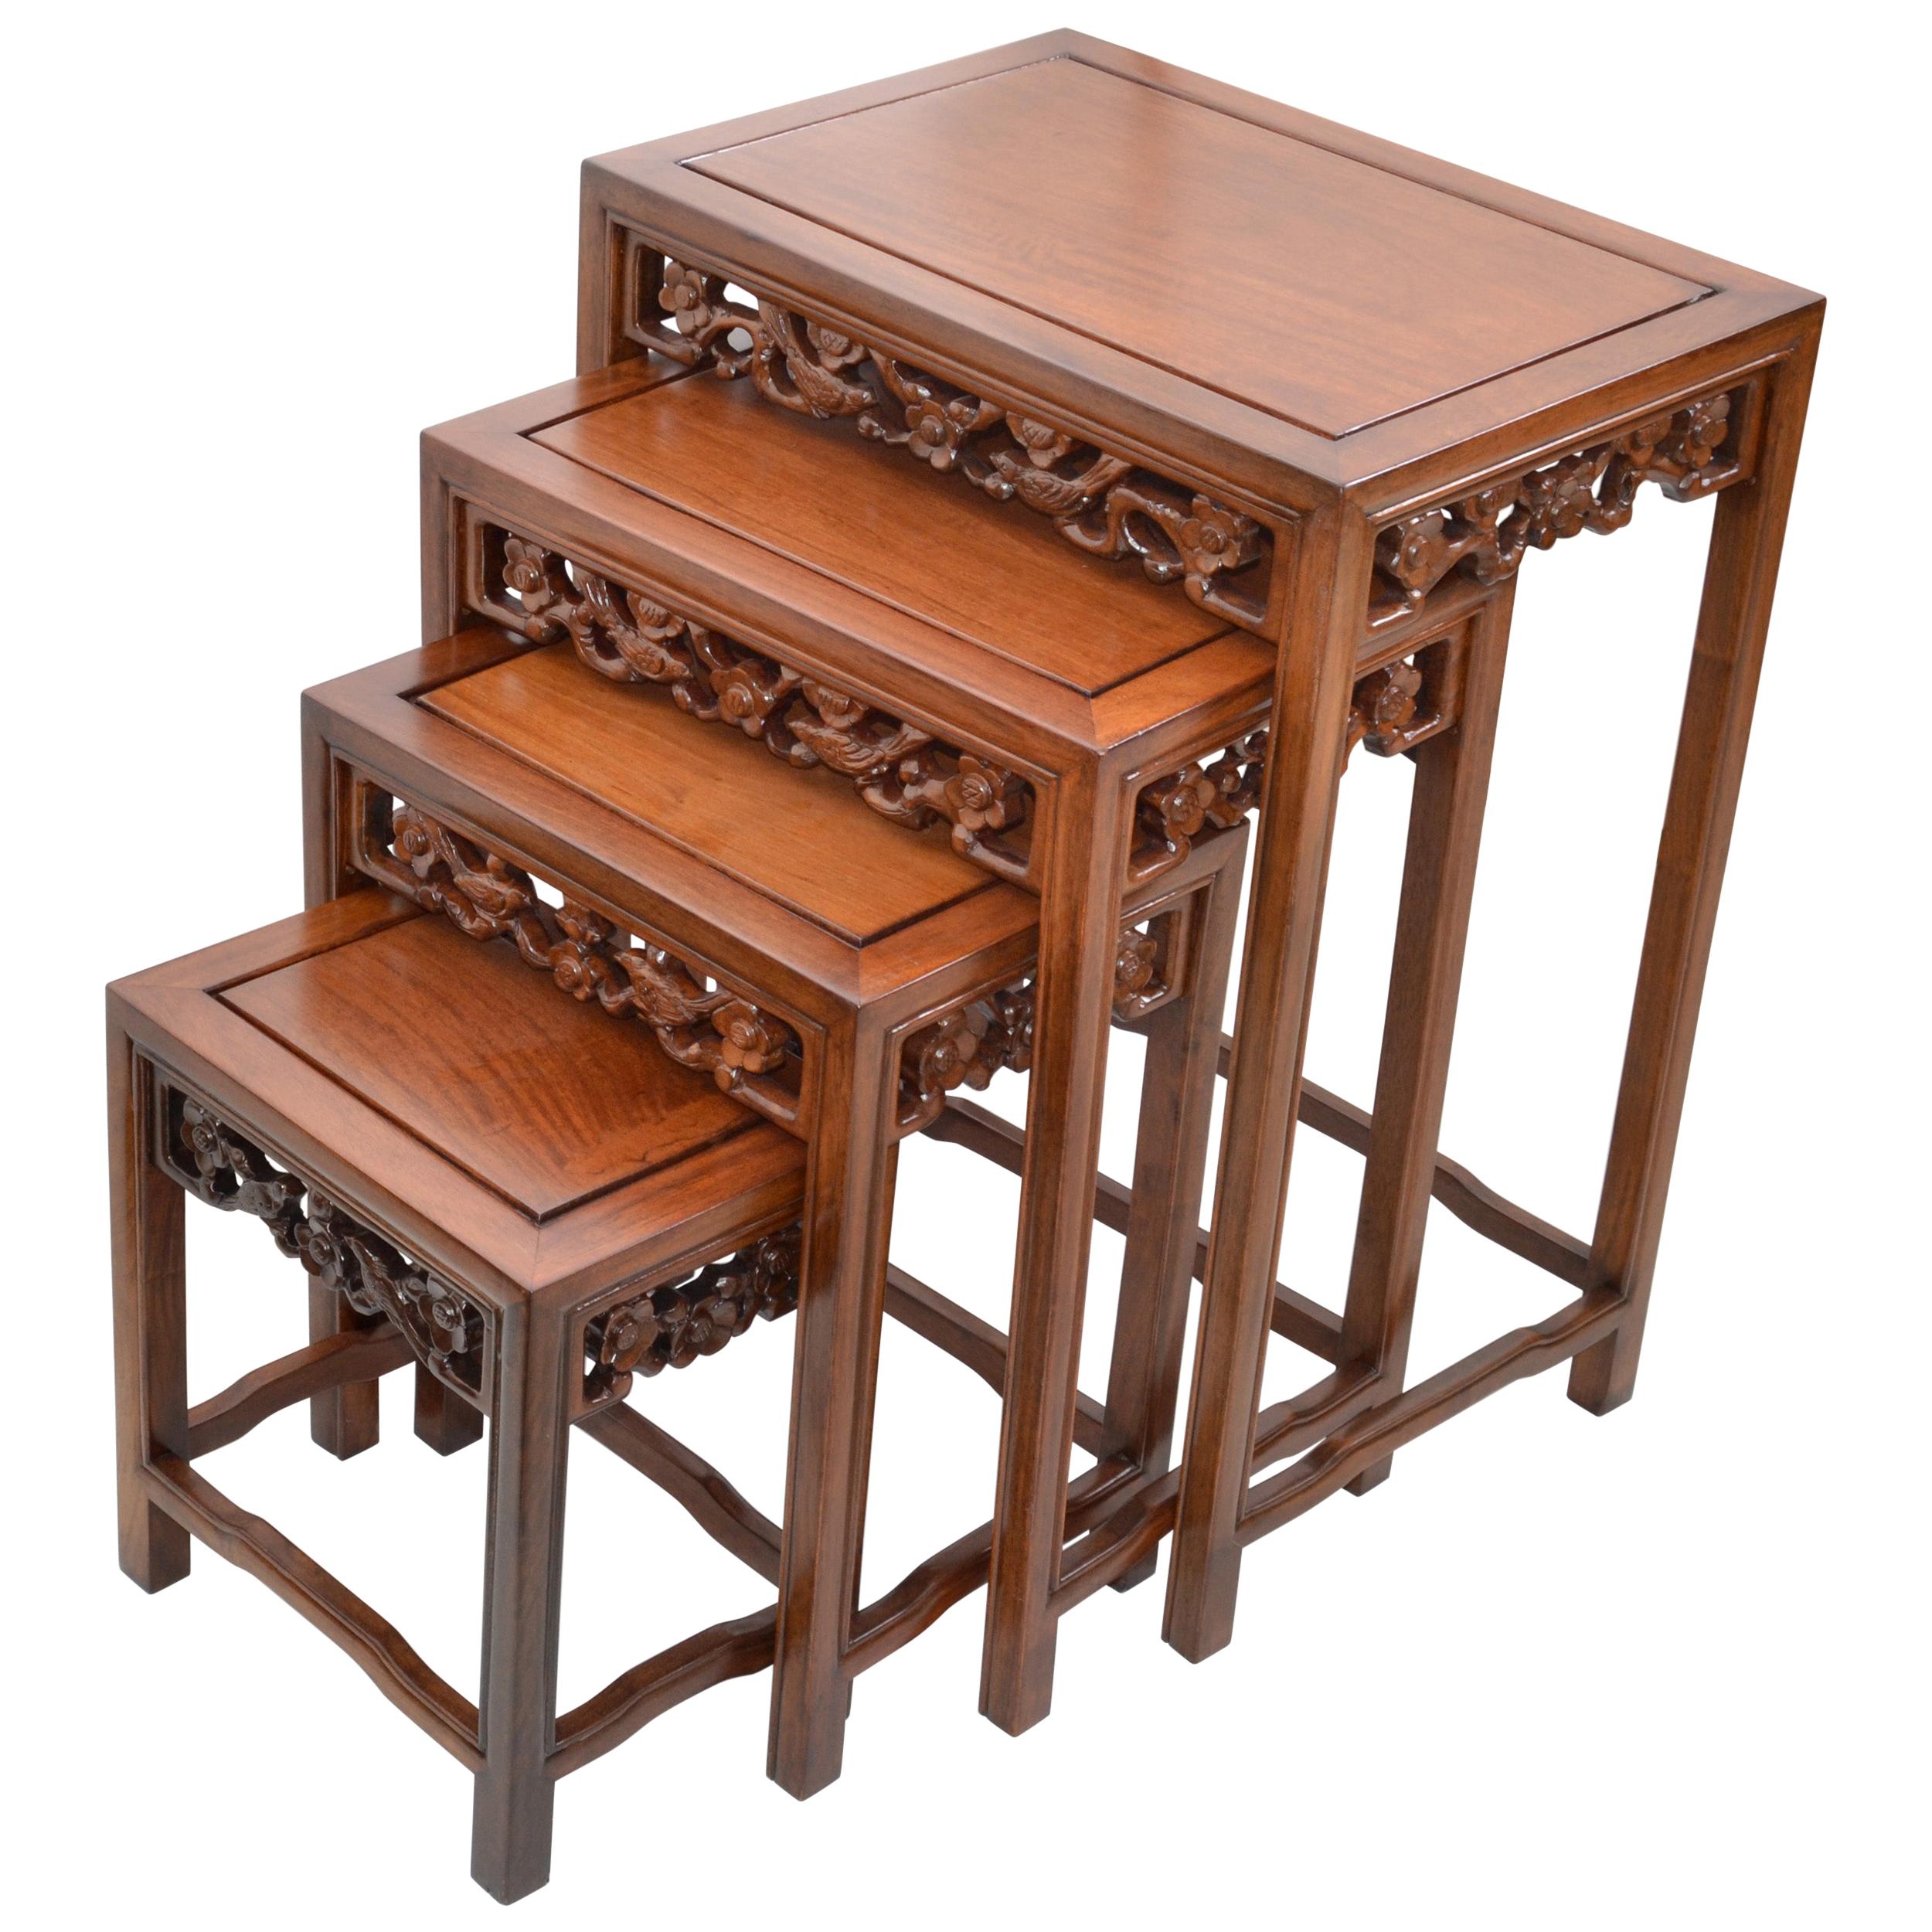 Chinoiserie Hand Carved Asian Wood Nesting Tables or Stacking Tables, Set of 4